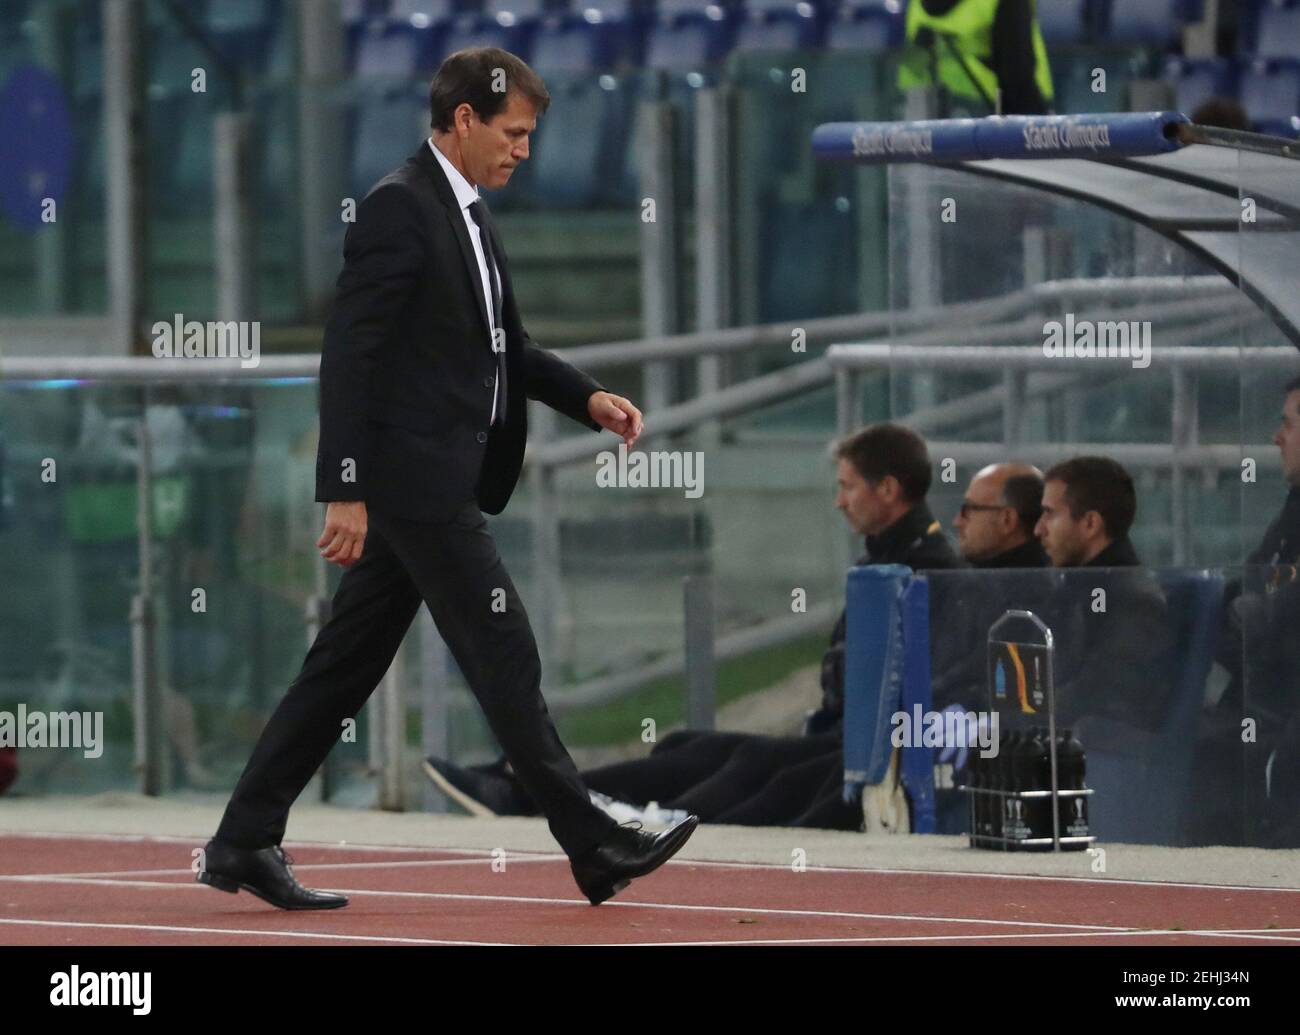 Soccer Football - Europa League - Group Stage - Group H - Lazio v Olympique de Marseille - Stadio Olimpico, Rome, Italy - November 8, 2018  Olympique de Marseille coach Rudi Garcia during the match                REUTERS/Alessandro Bianchi Stock Photo